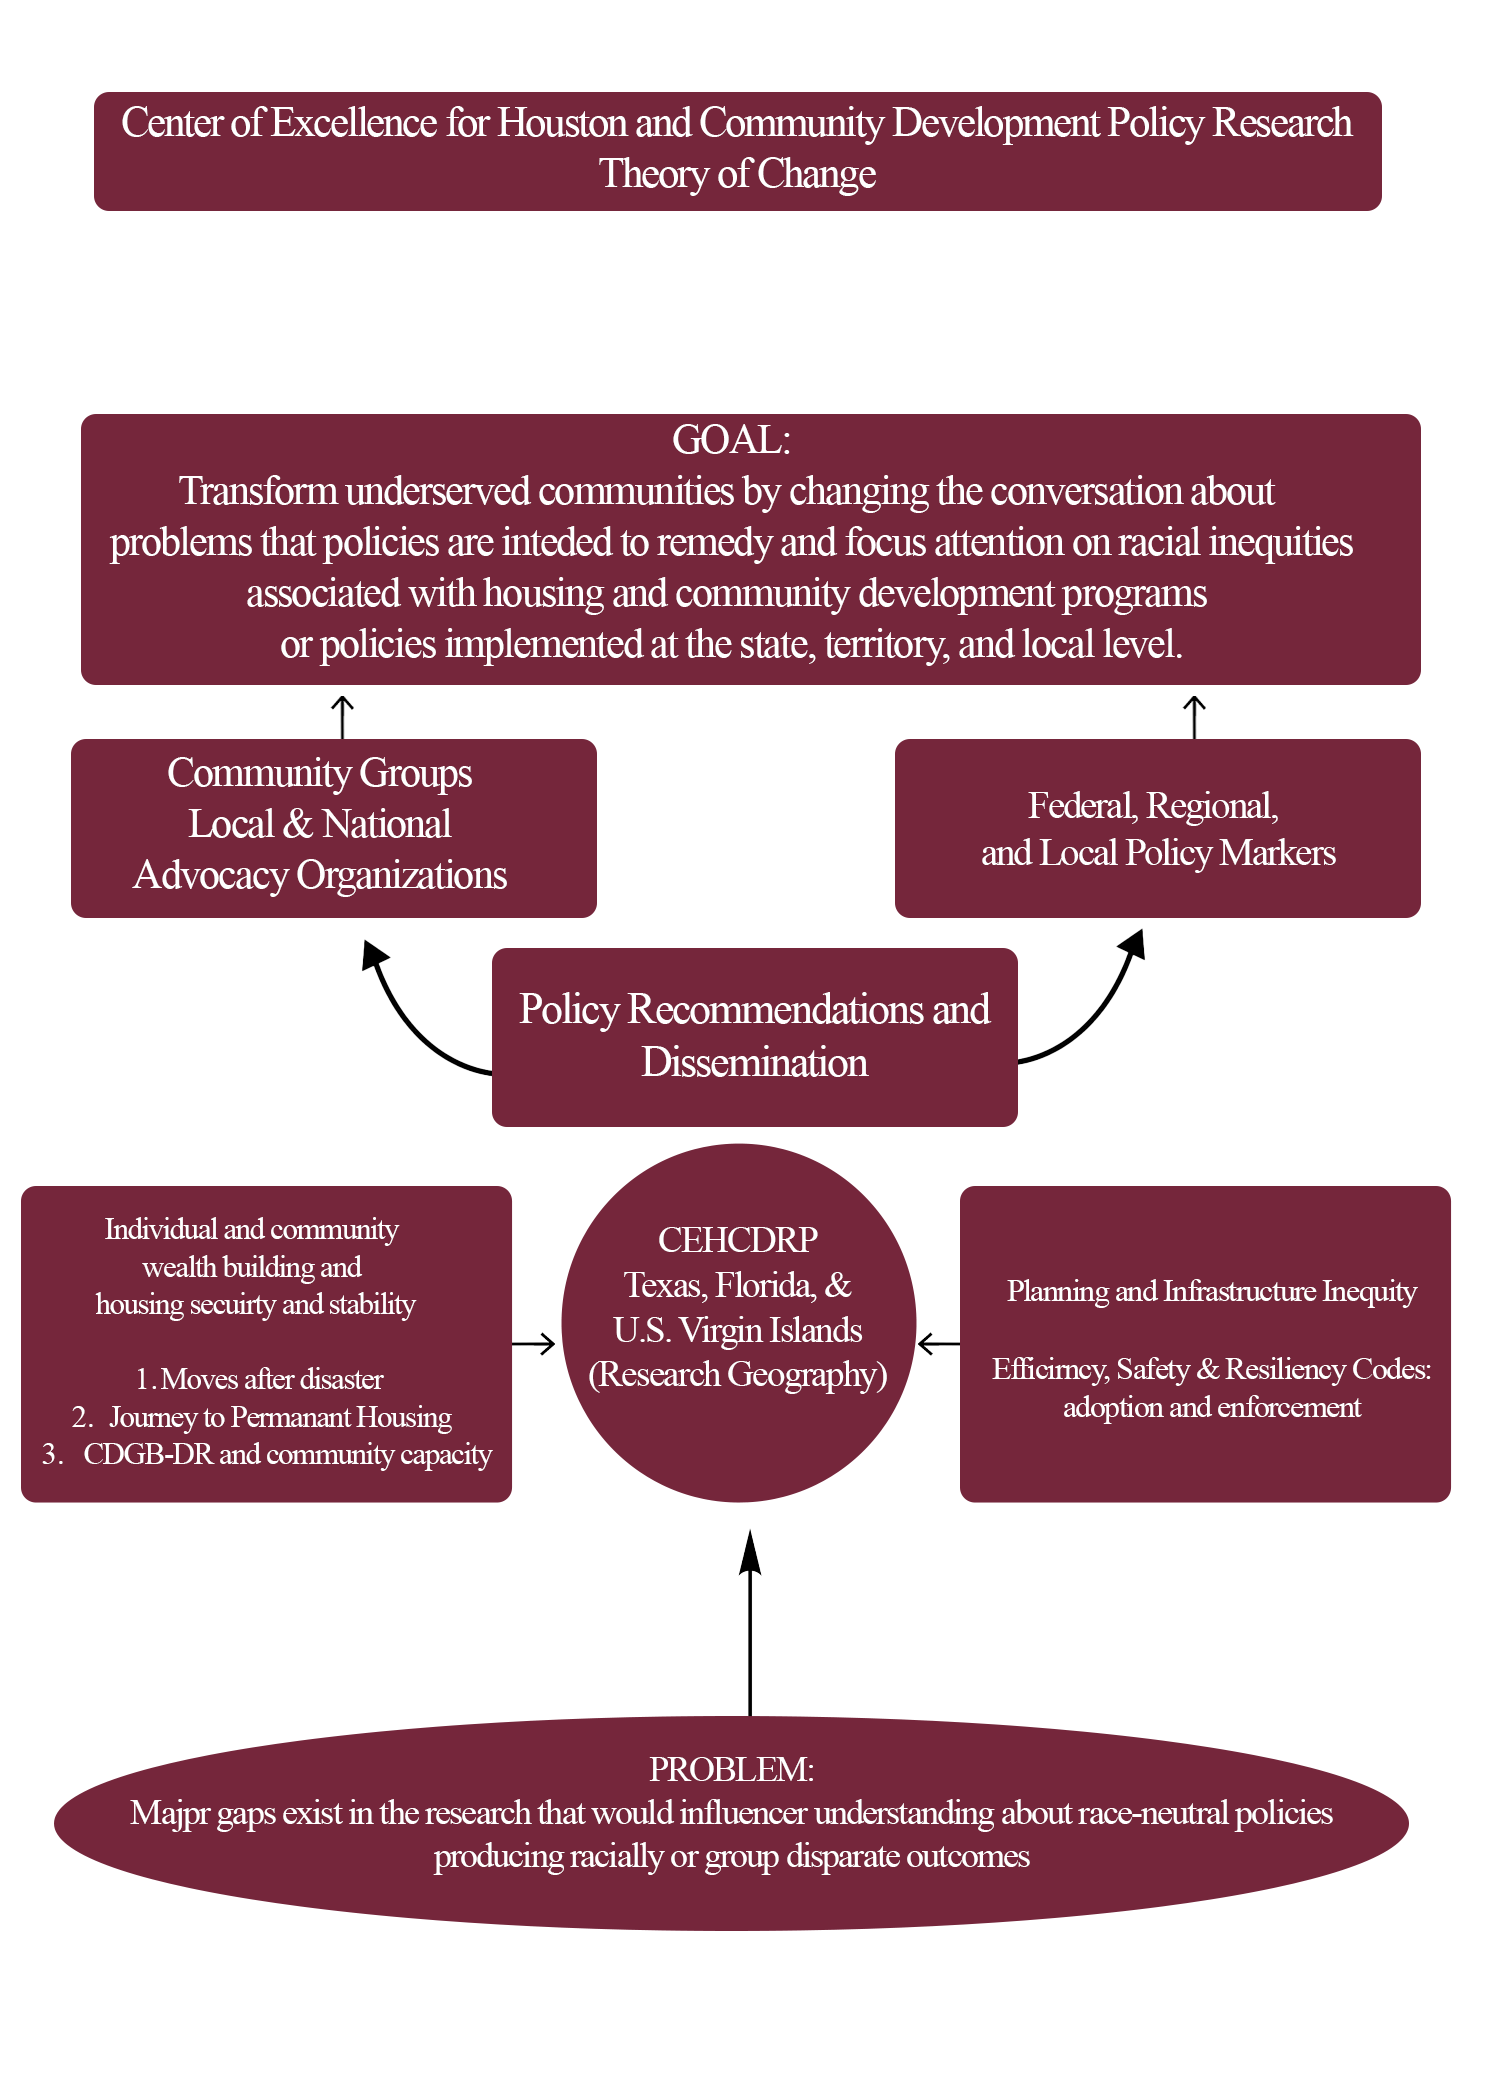 Demonstrate the goal of the HCDPR Theory of Change